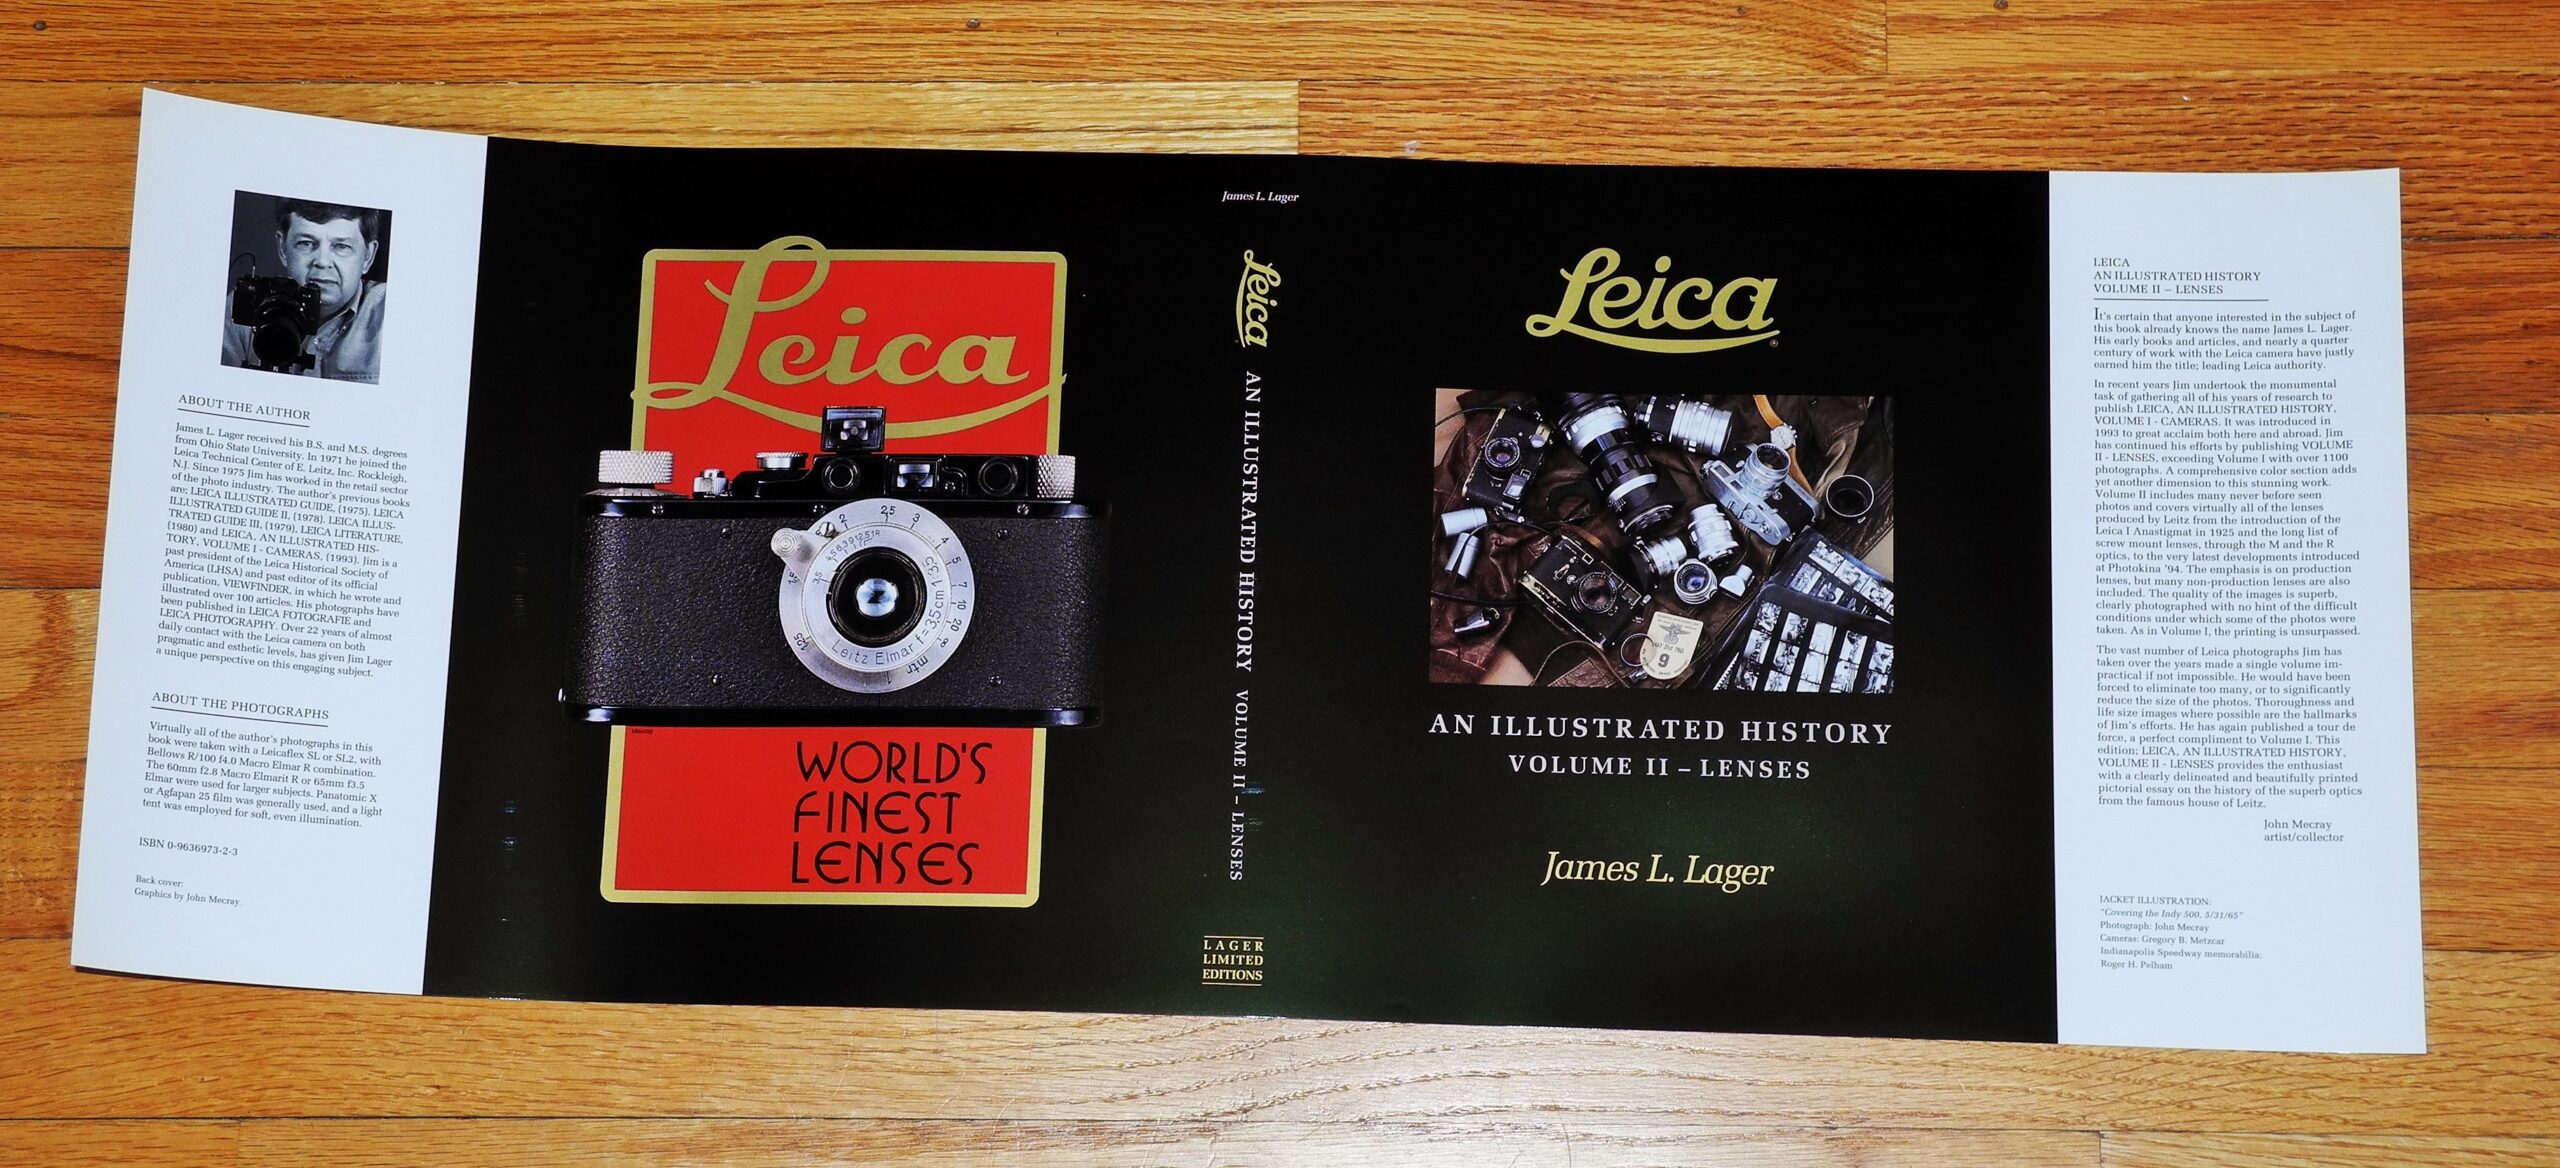 Signed by the author Photo Book Rare Leica 